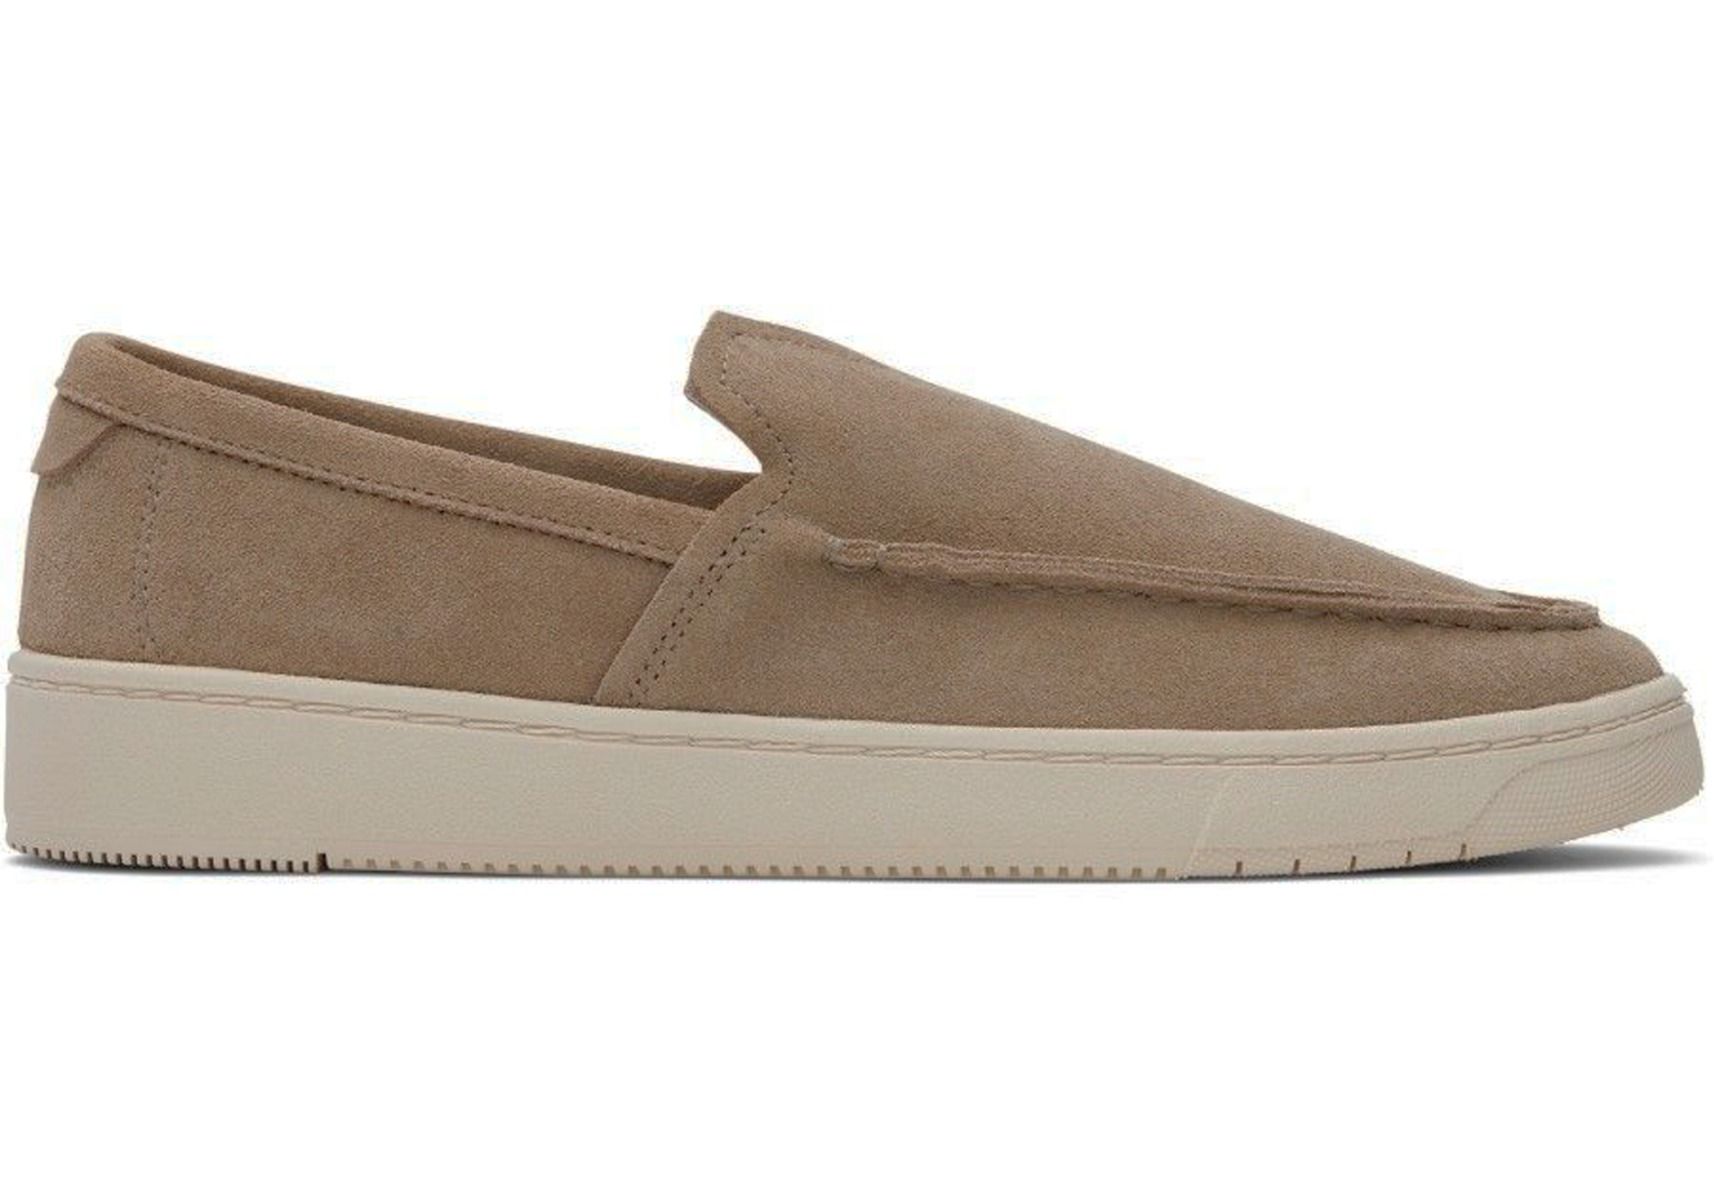 TOMS Dune Trvl Lite Ανδρικά Casual Loafers 10020833 Πούρου ΑΝΔΡΑΣ>ΠΑΠΟΥΤΣΙΑ>LOAFERS